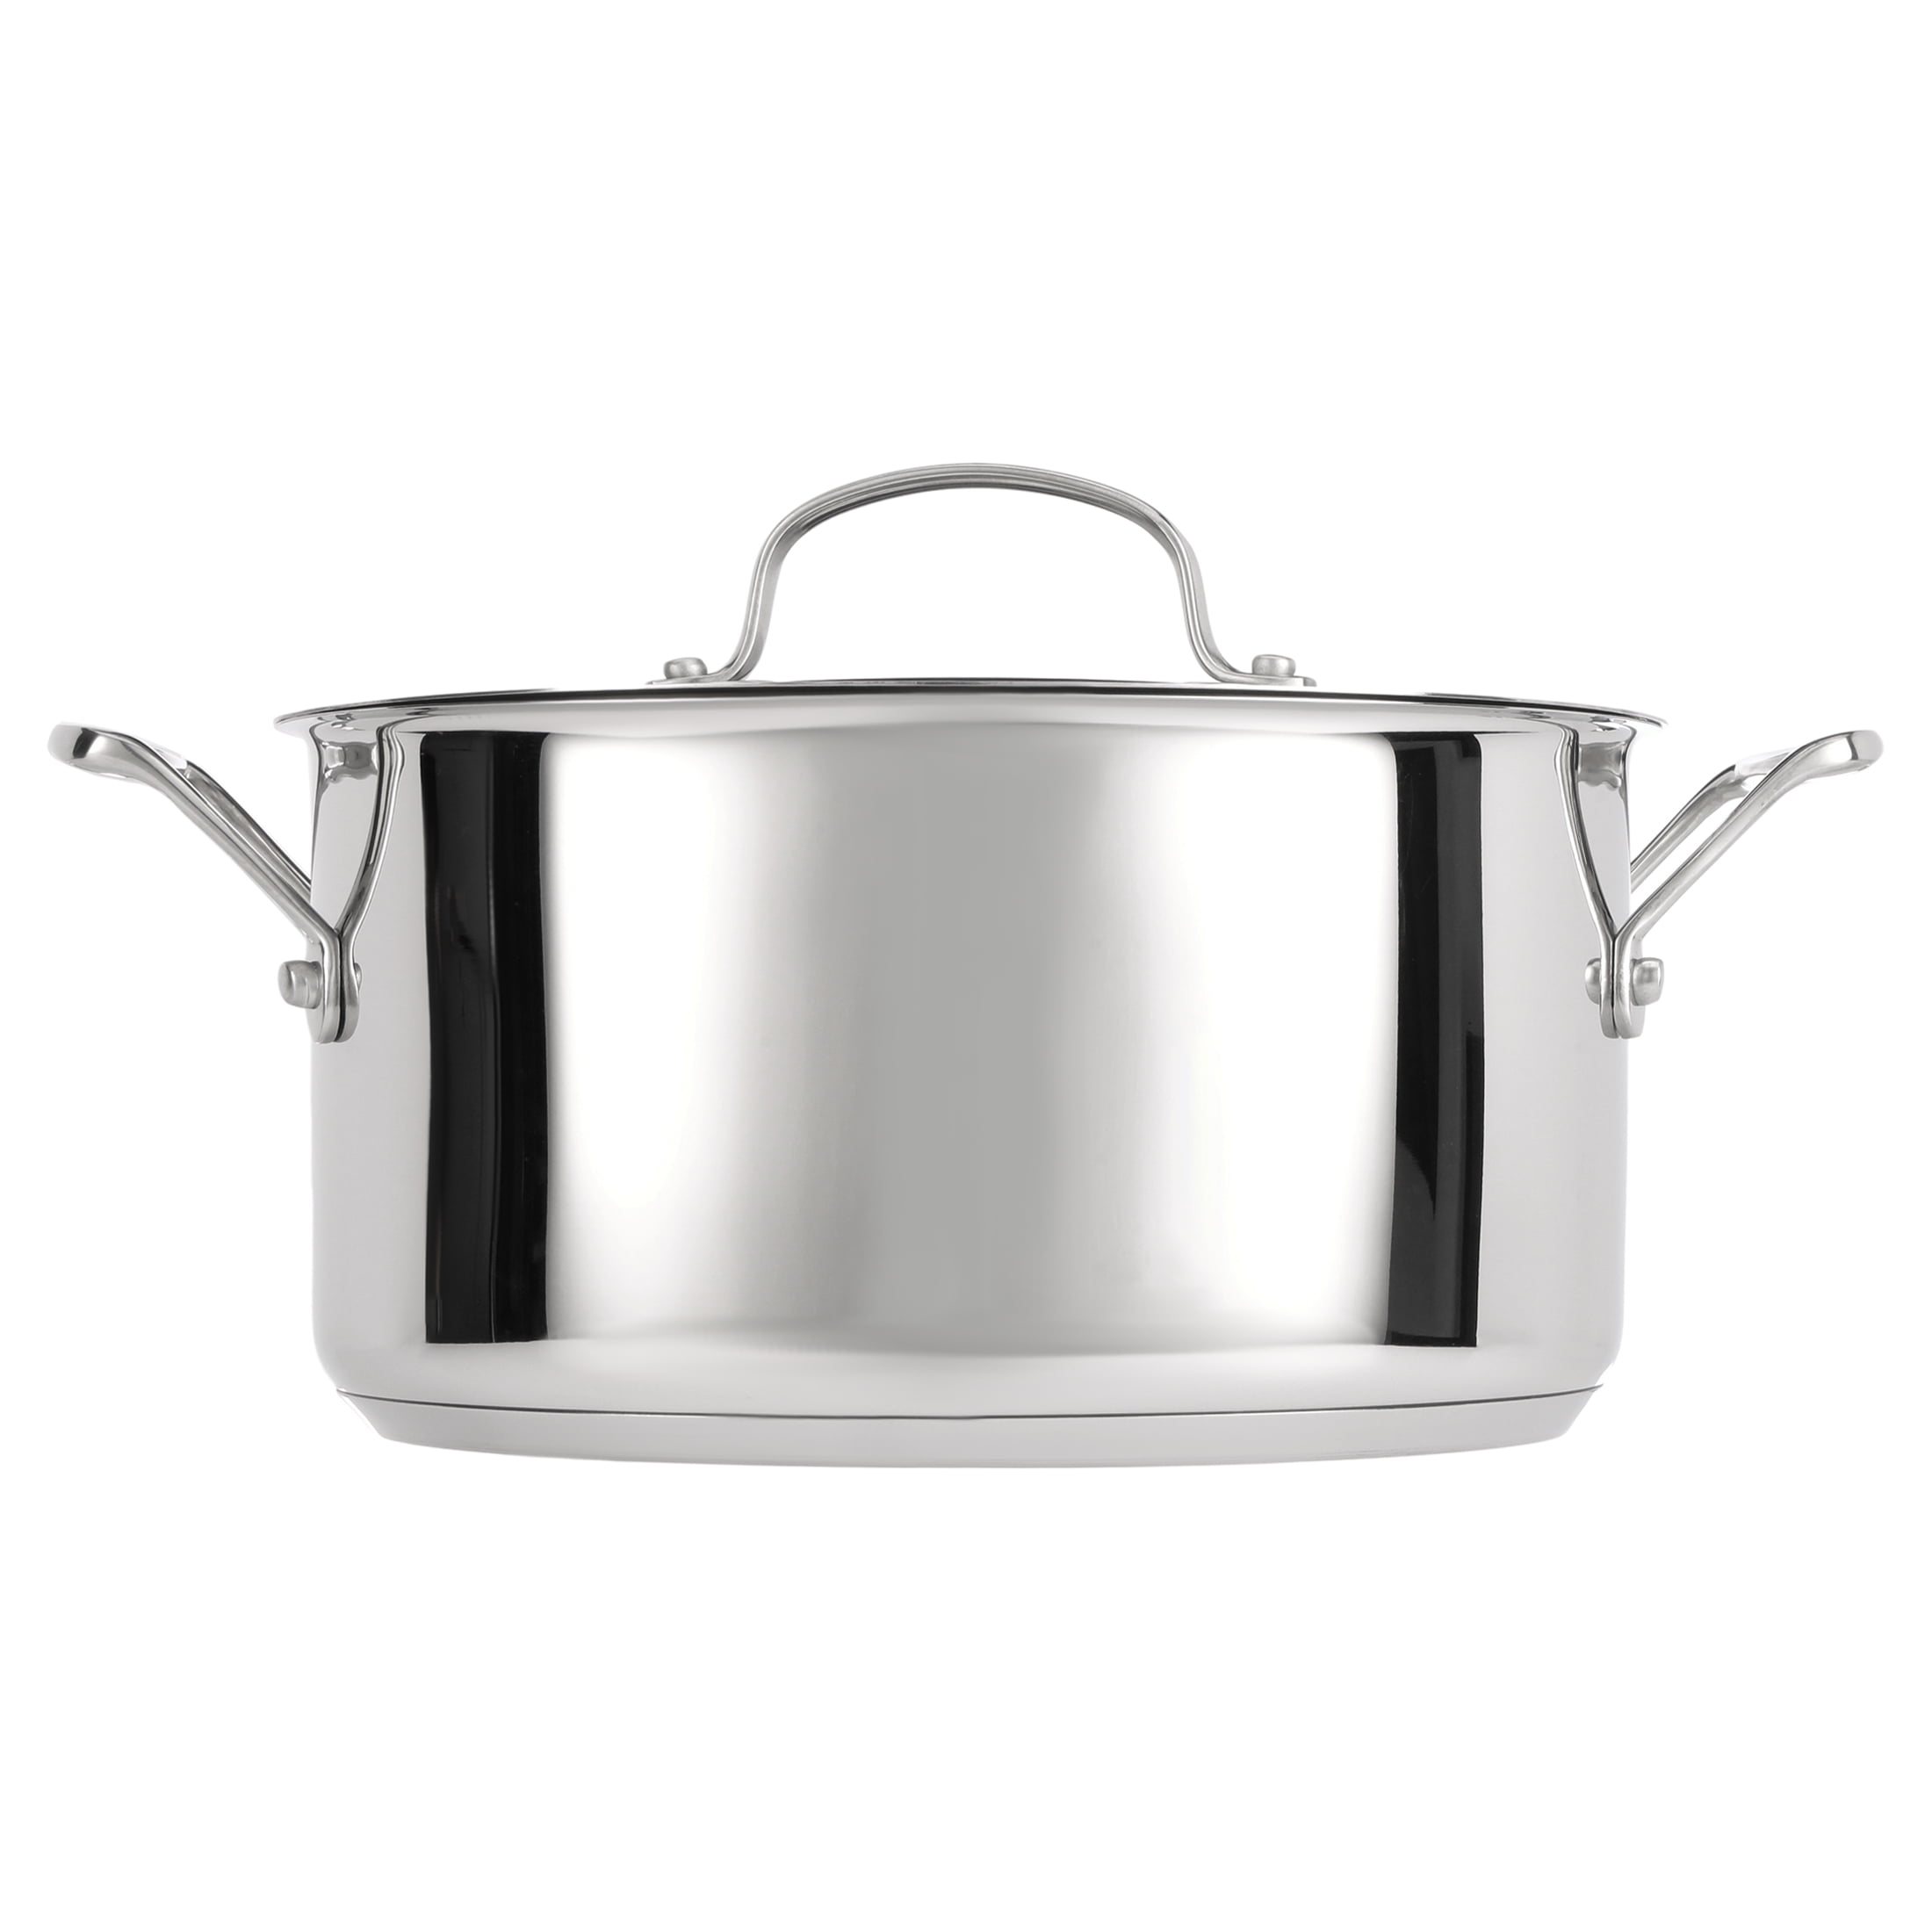  Cuisinart 766-24 Chef's Classic 8-Quart Stockpot with Cover, Stainless  Steel: Cusinart Pot: Home & Kitchen